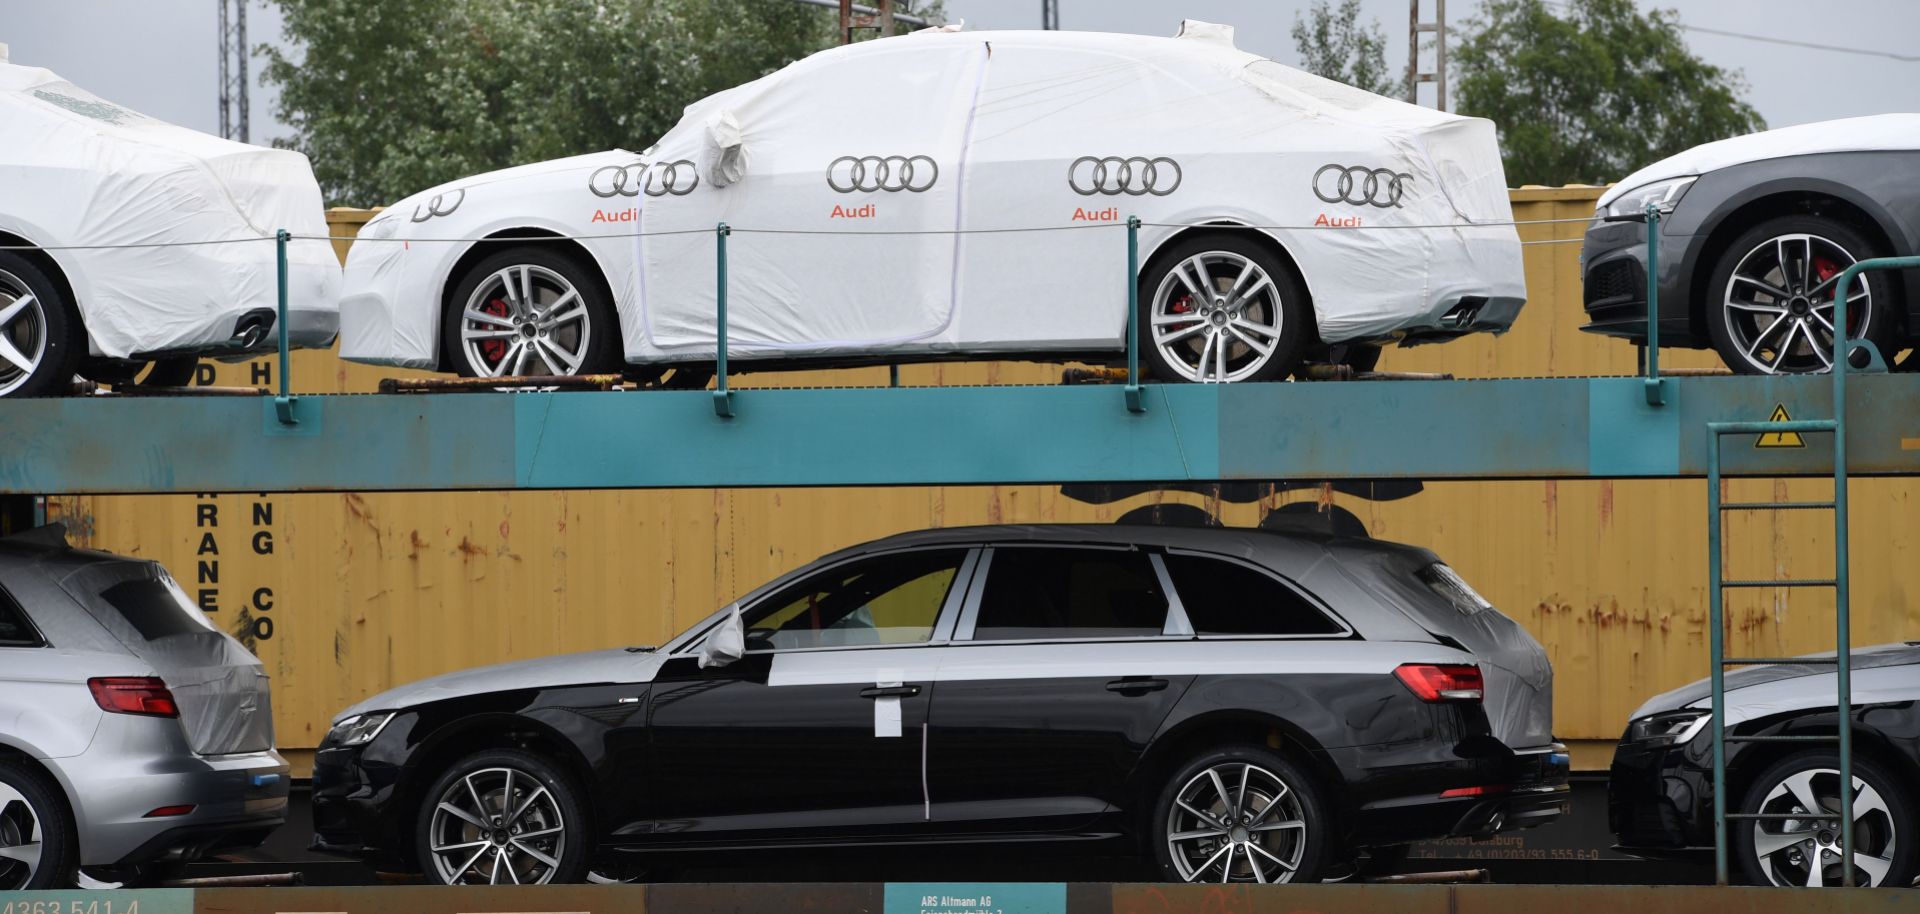 Cars from German manufacturer Audi await transport in the German port city of Bremerhaven in July 2017.